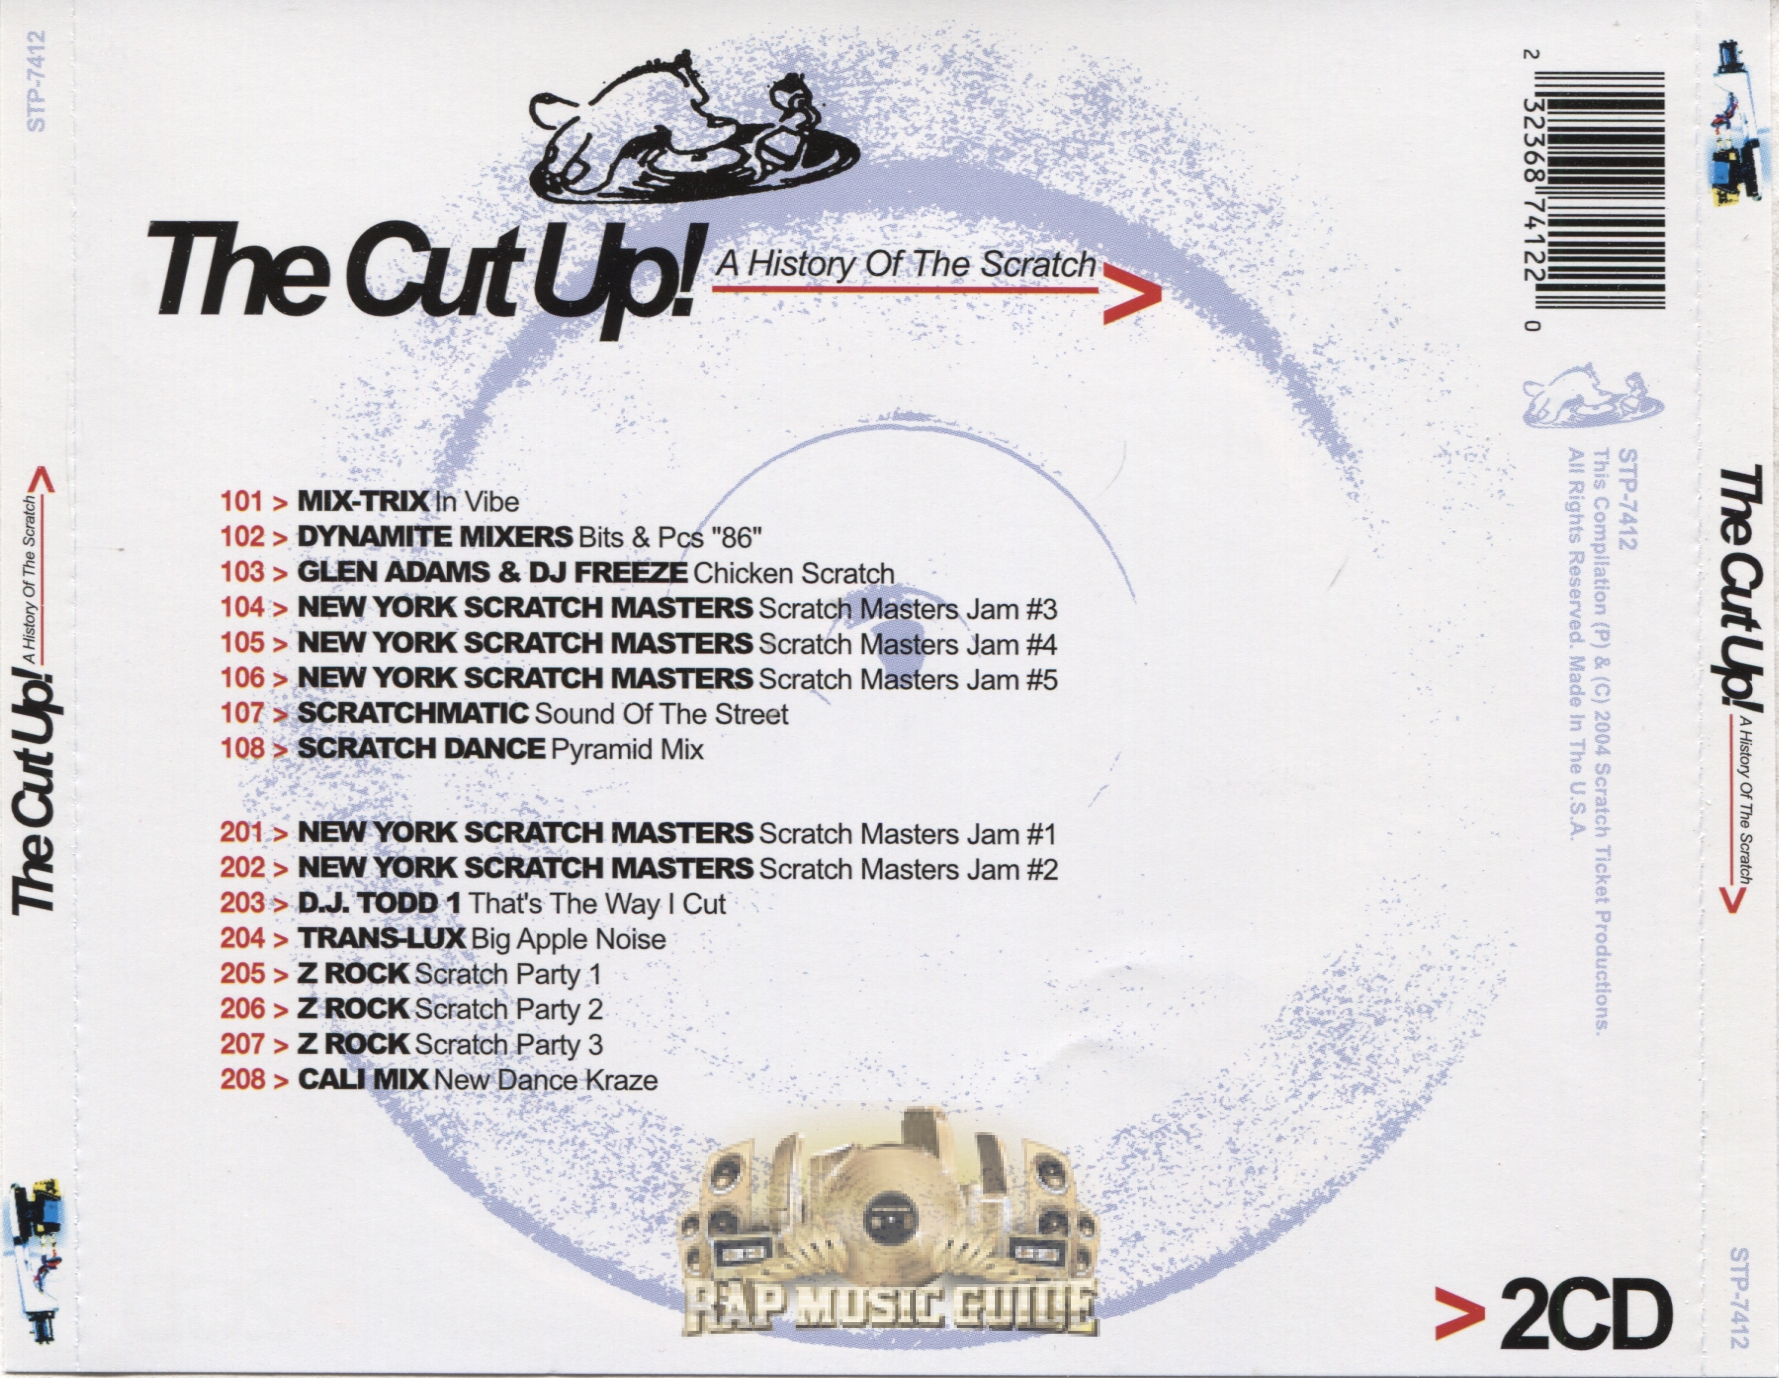 The Cut Up! - A History Of Scratch: CD | Rap Music Guide